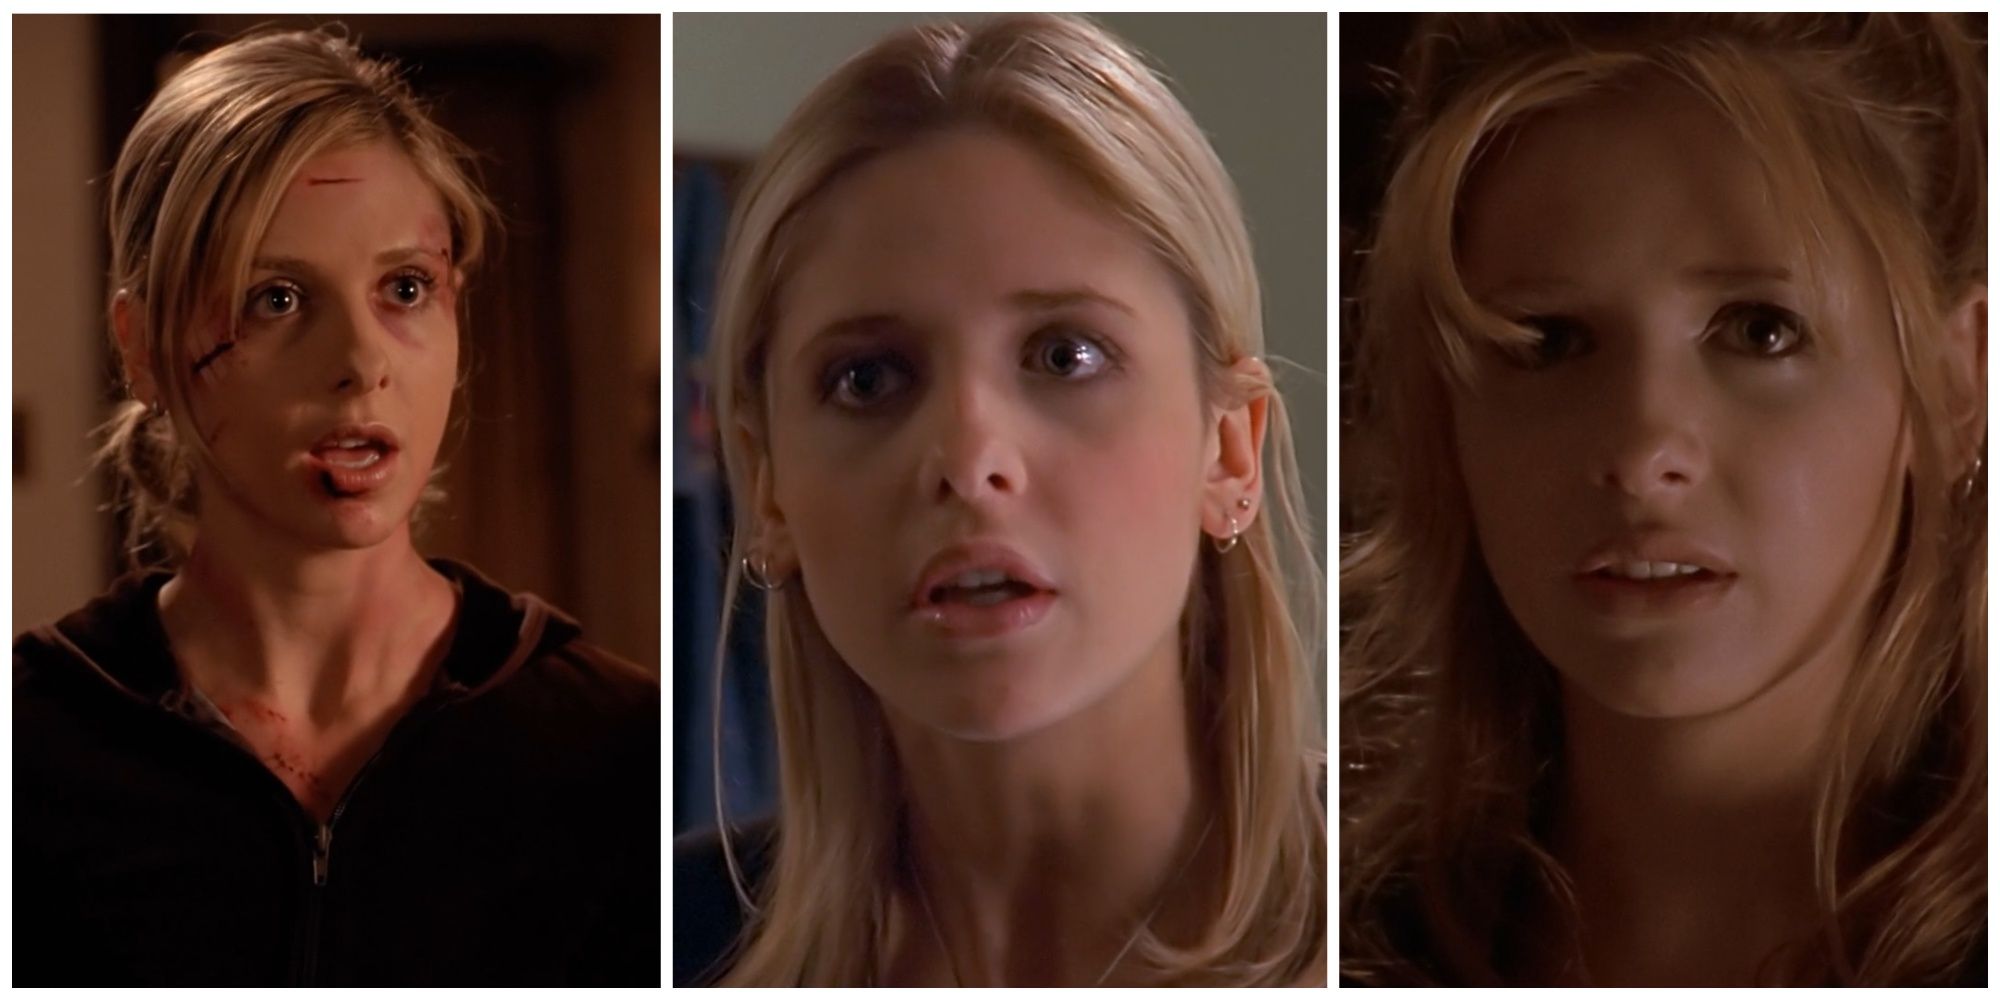 Split image showing various images of Buffy the Vampire Slayer.